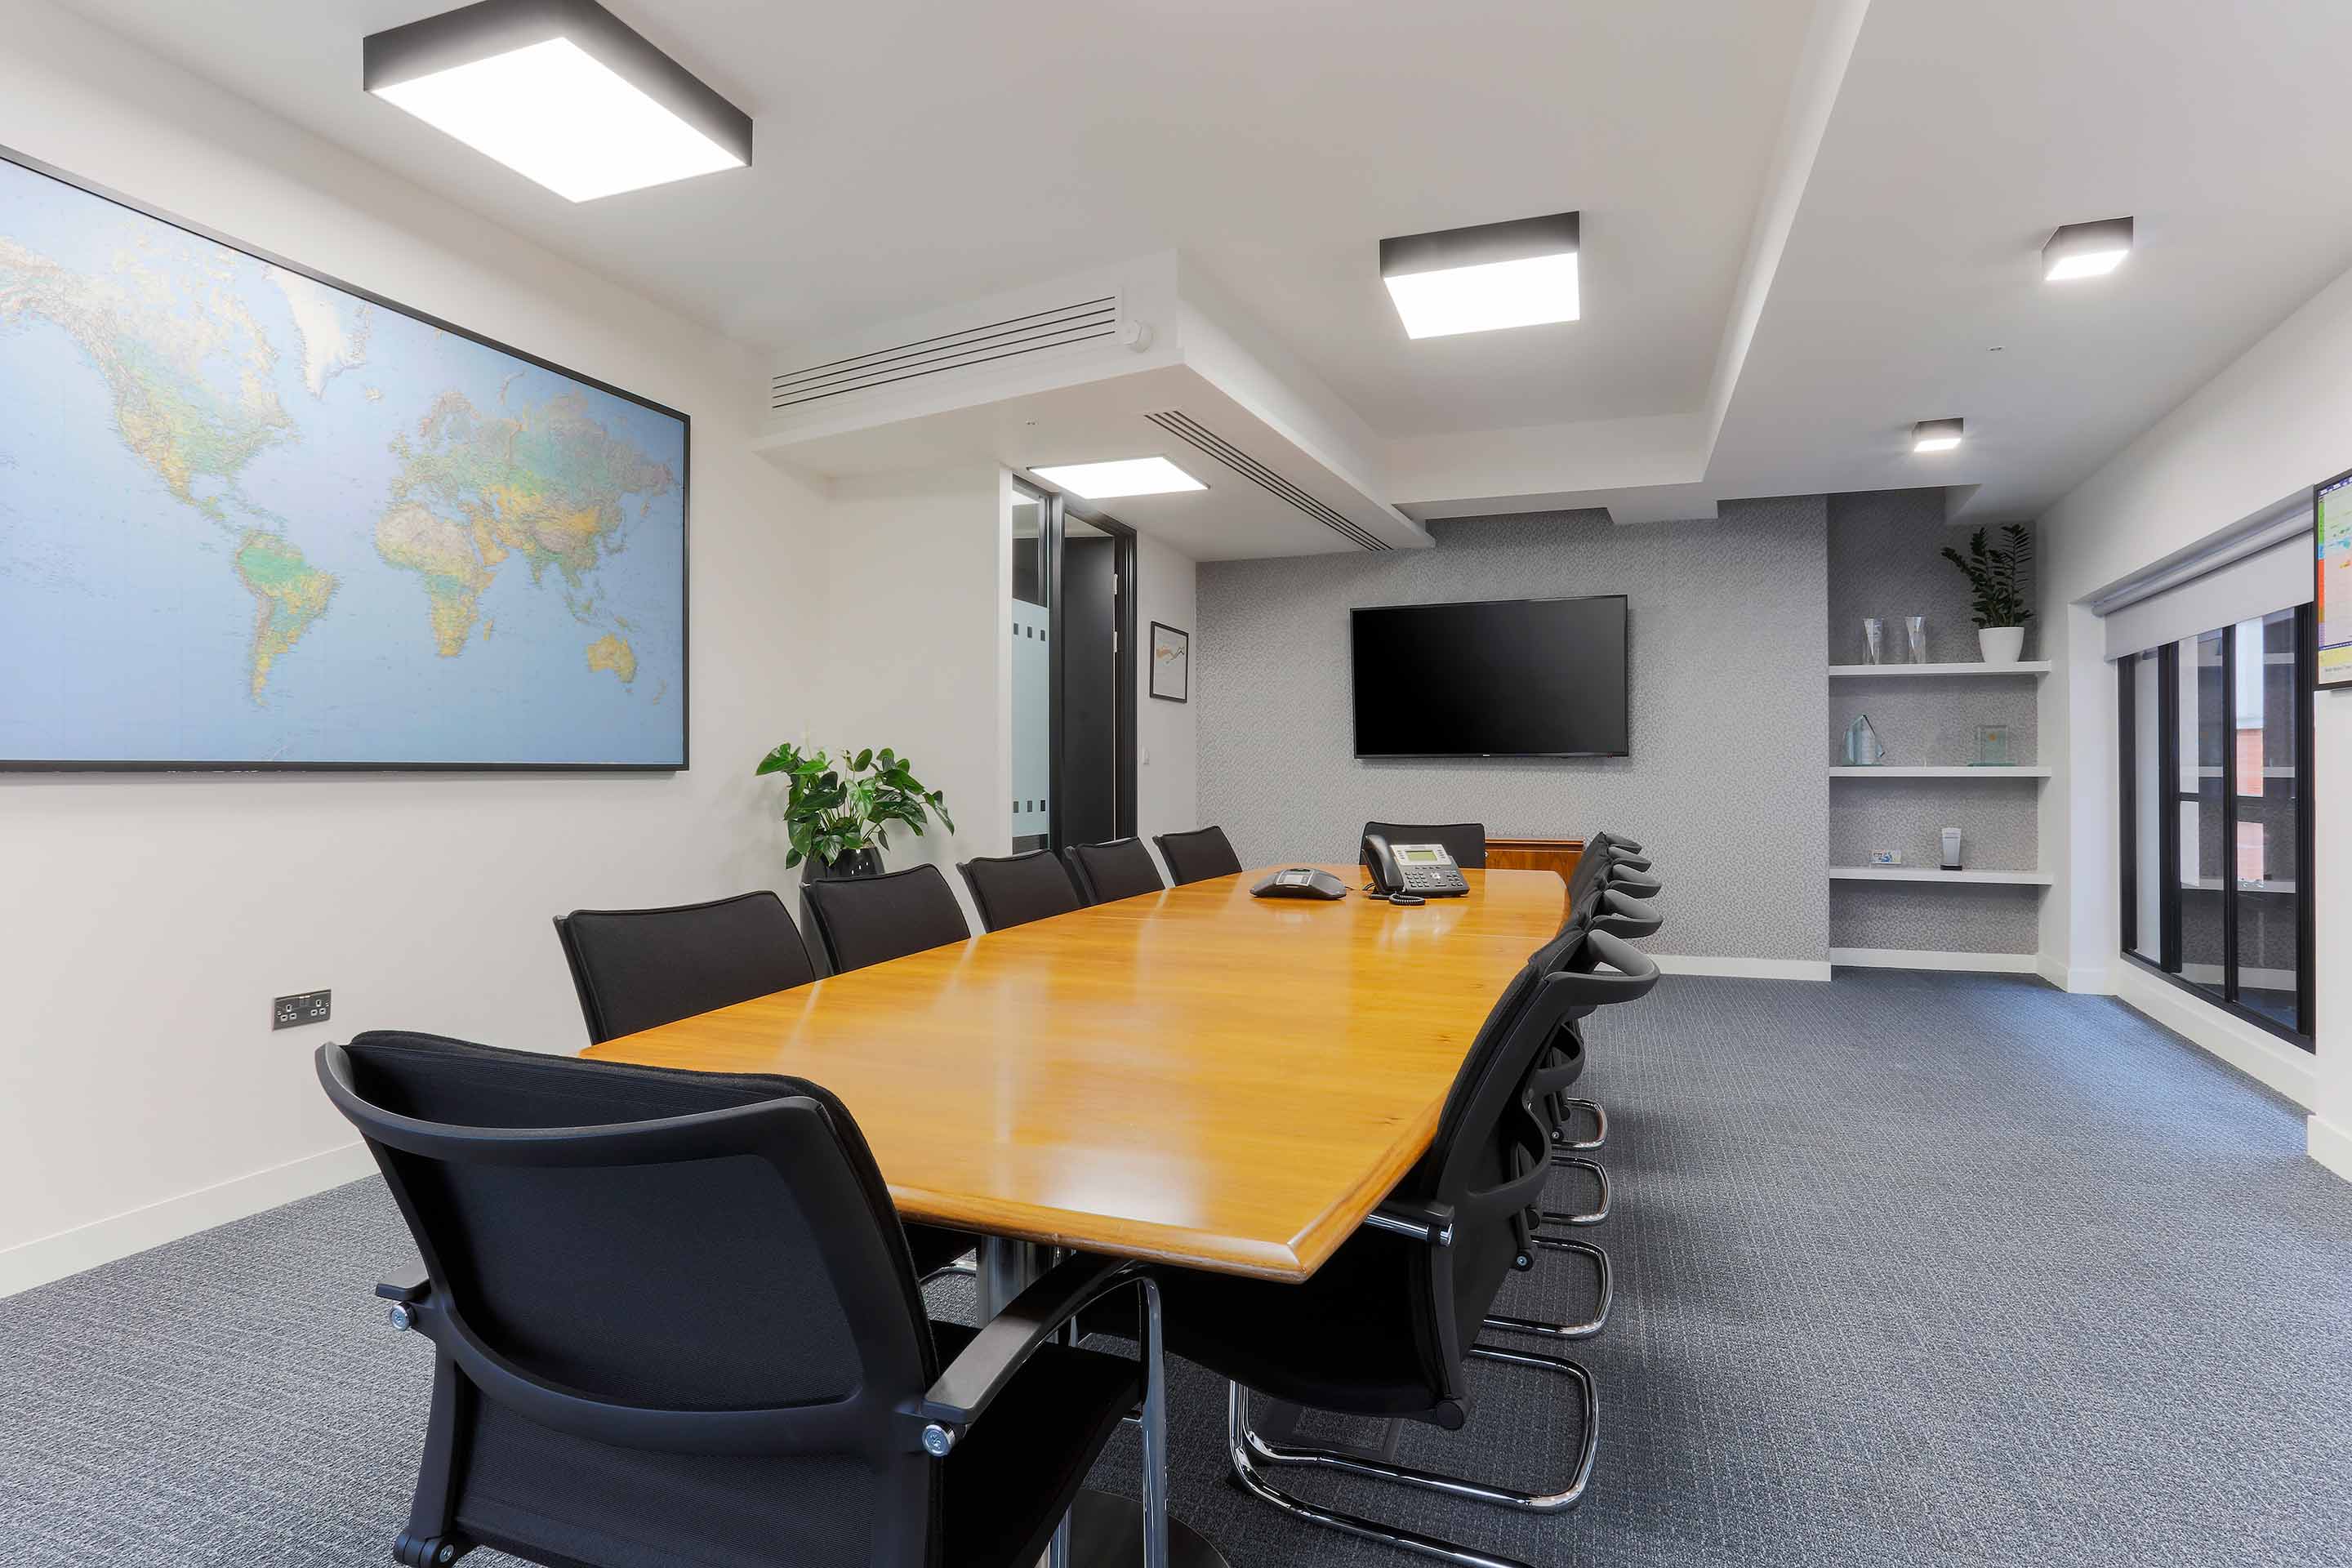 Mulvaney Capital Management's meeting room